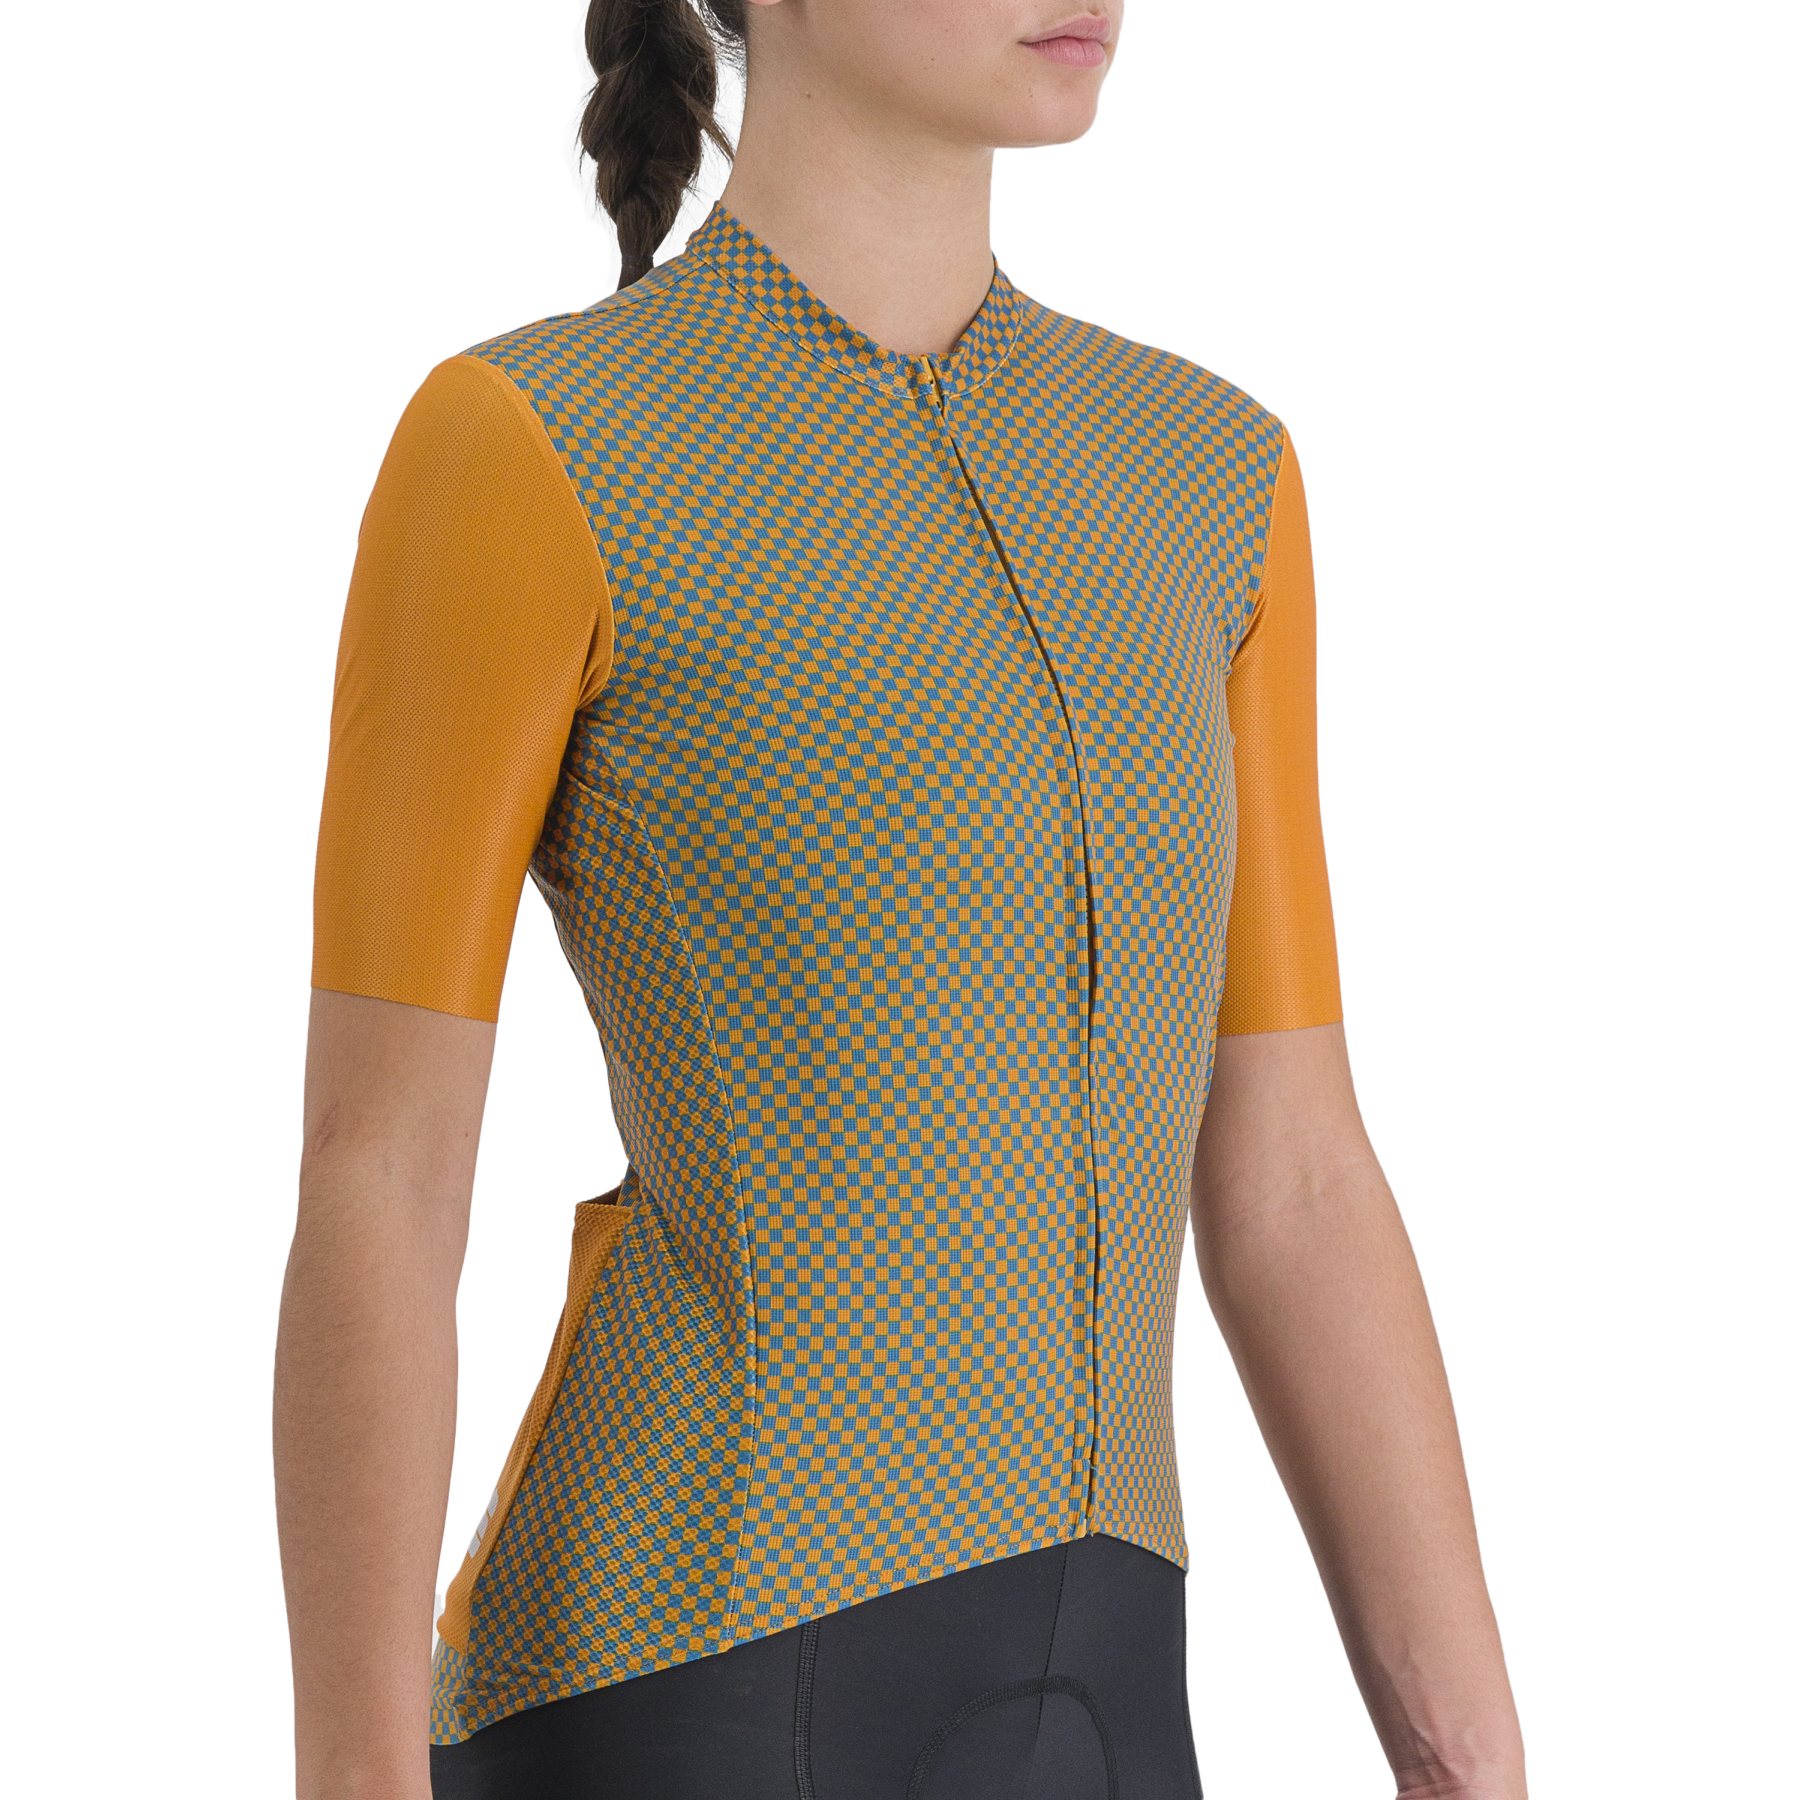 Picture of Sportful Checkmate Jersey Women - 261 Dark Gold Berry Blue